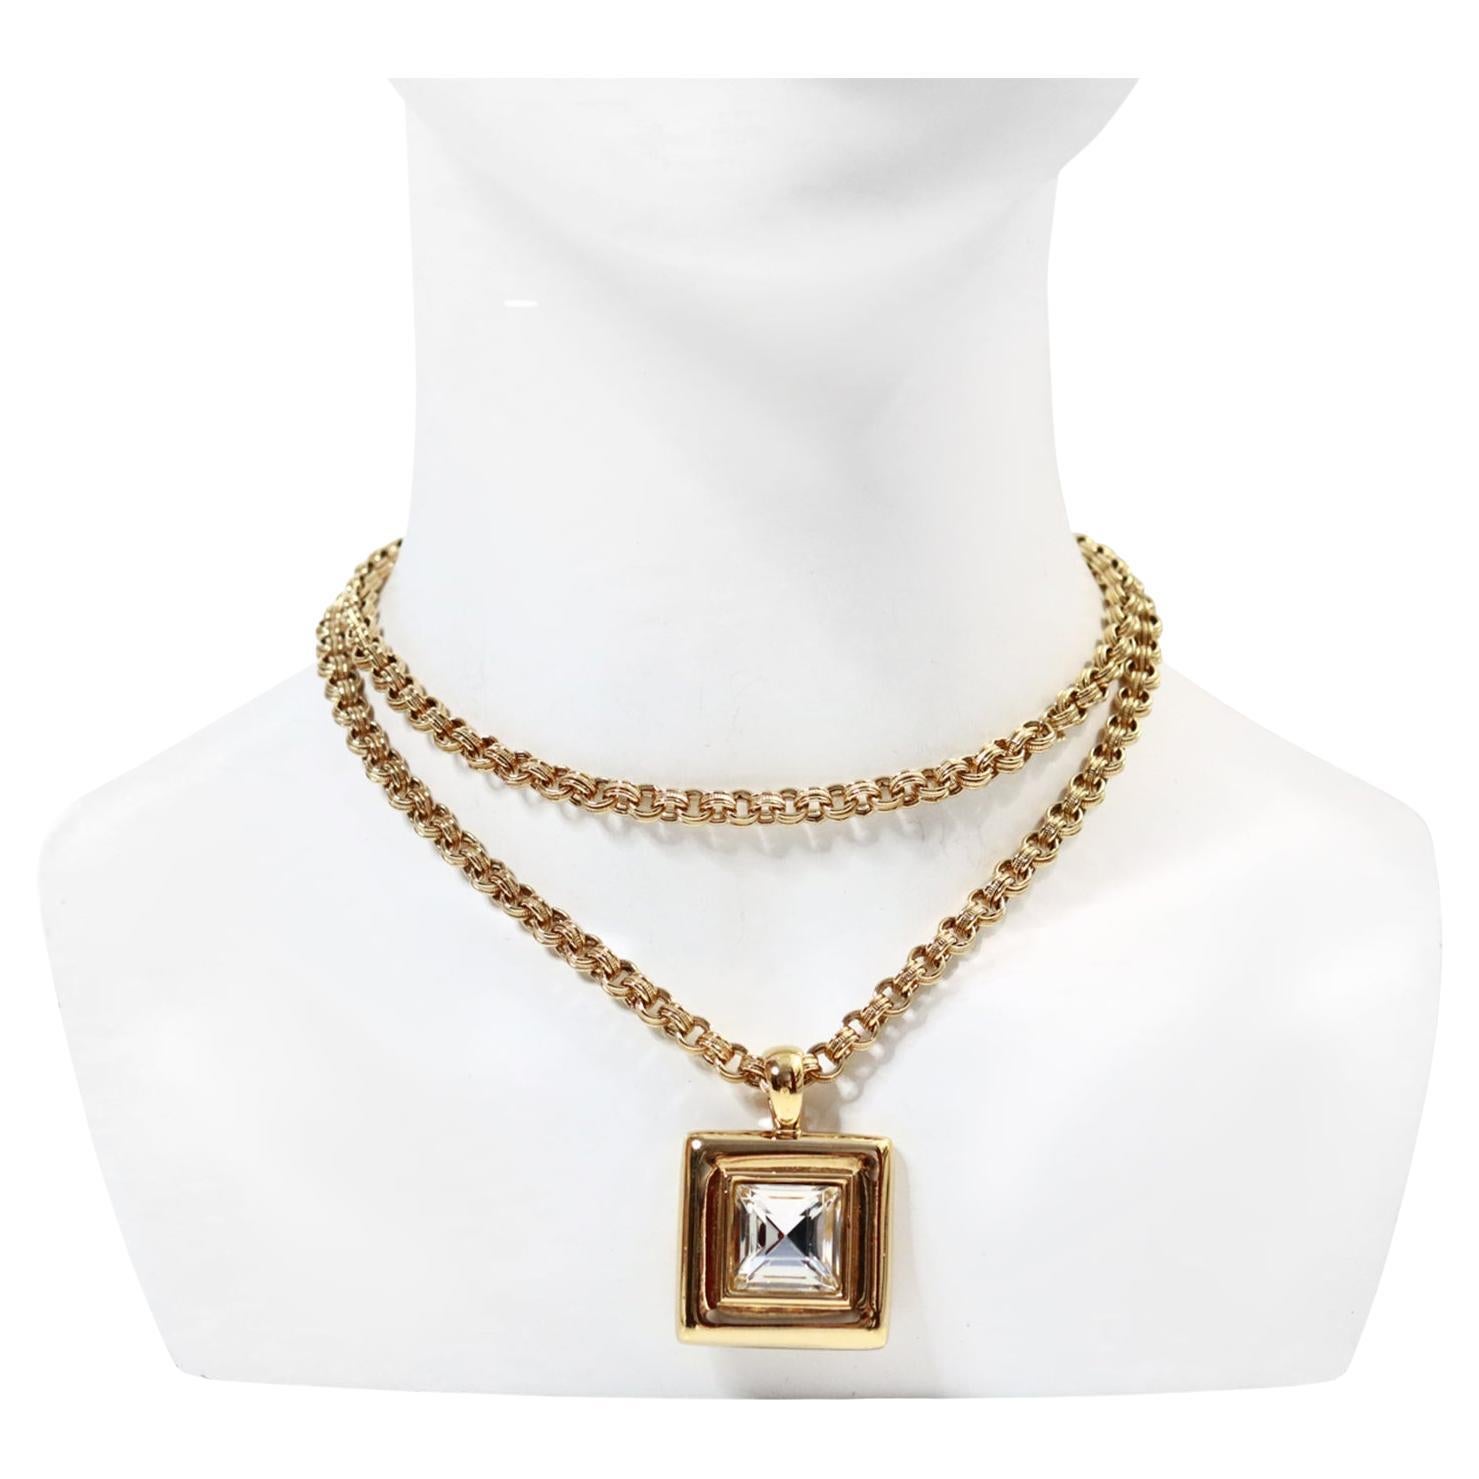 Artist Vintage Givenchy Link Chain with Dangling Drop Necklace Circa 1980s For Sale